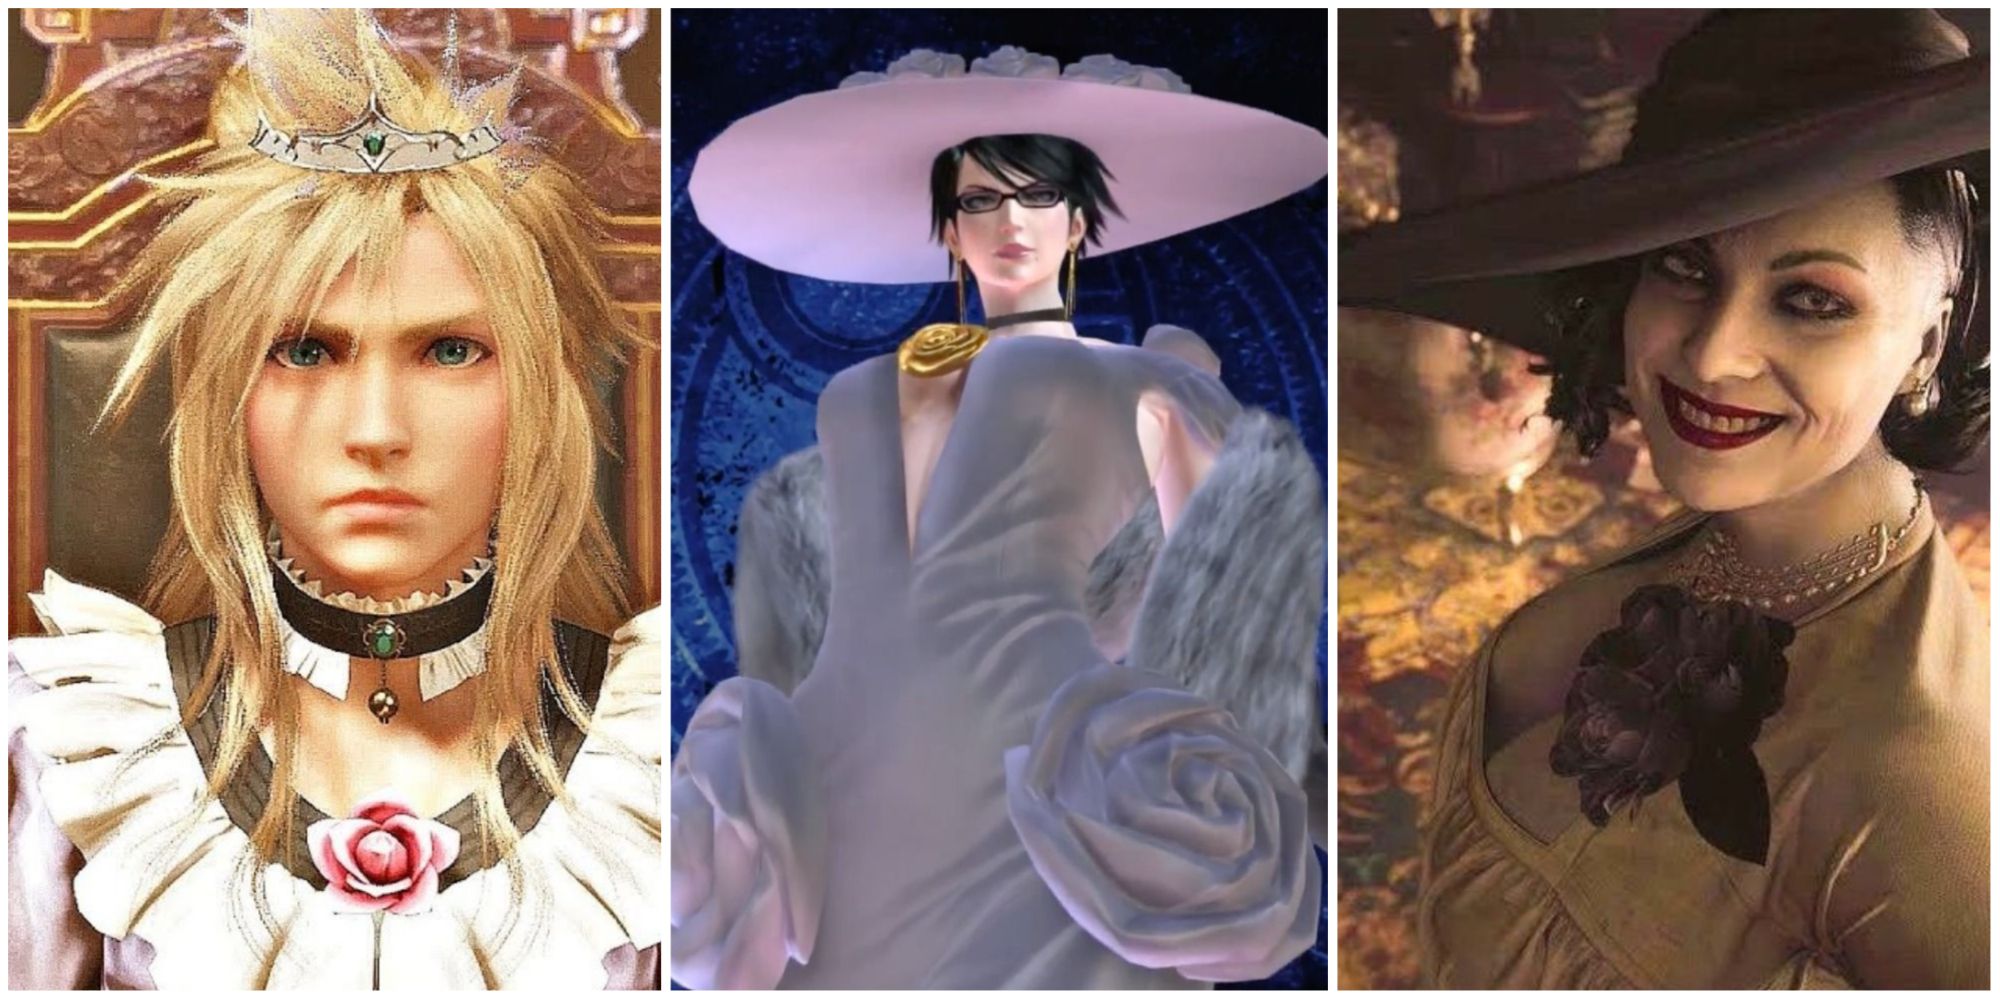 Cloud wearing a frilly dress and a crown, Bayonetta wearing her white dress from the opening of Bayonetta 2, and Lady Dimitrescu holding up Ethan while smiling, left to right